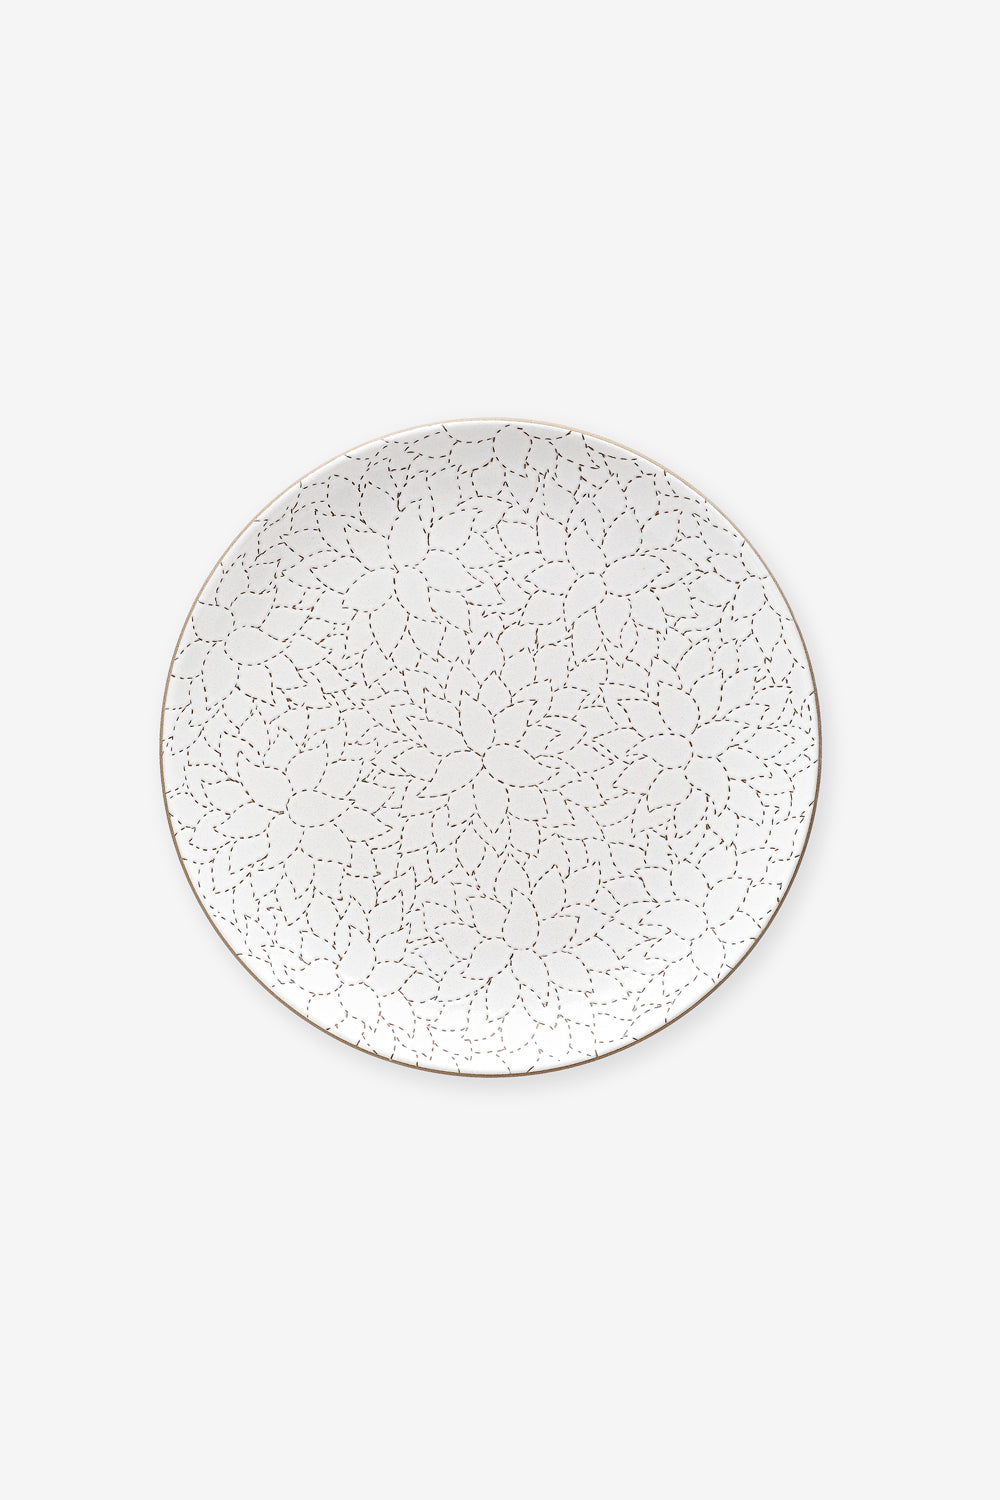 Alabama Chanin Etched Camellia Dinner Plate in Opaque White from Alabama Chanin and Heath Ceramics Collaboration